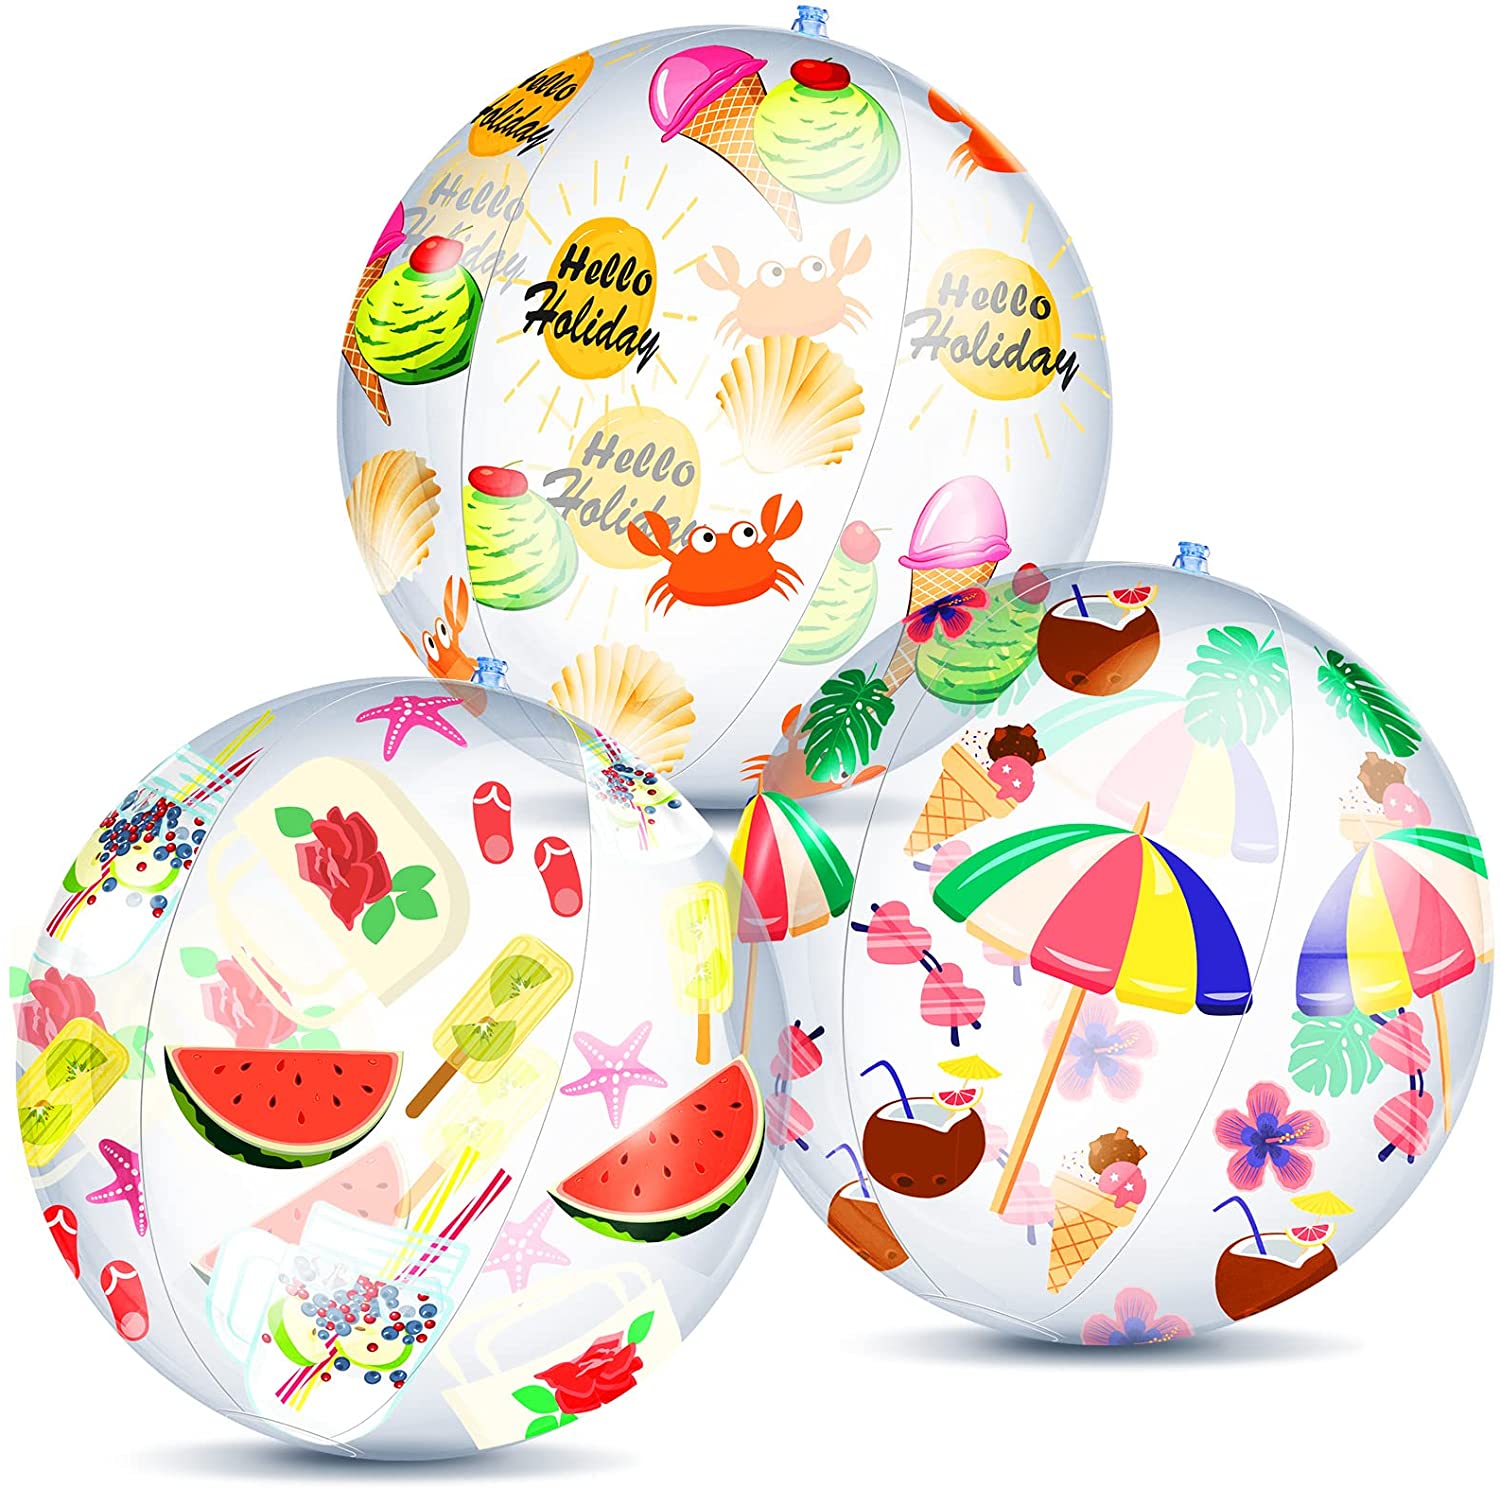 3 Pieces Inflatable Beach Balls 13 Inch Inflatable Beach Ball for Kids Transparent Swimming Pool Party Ball